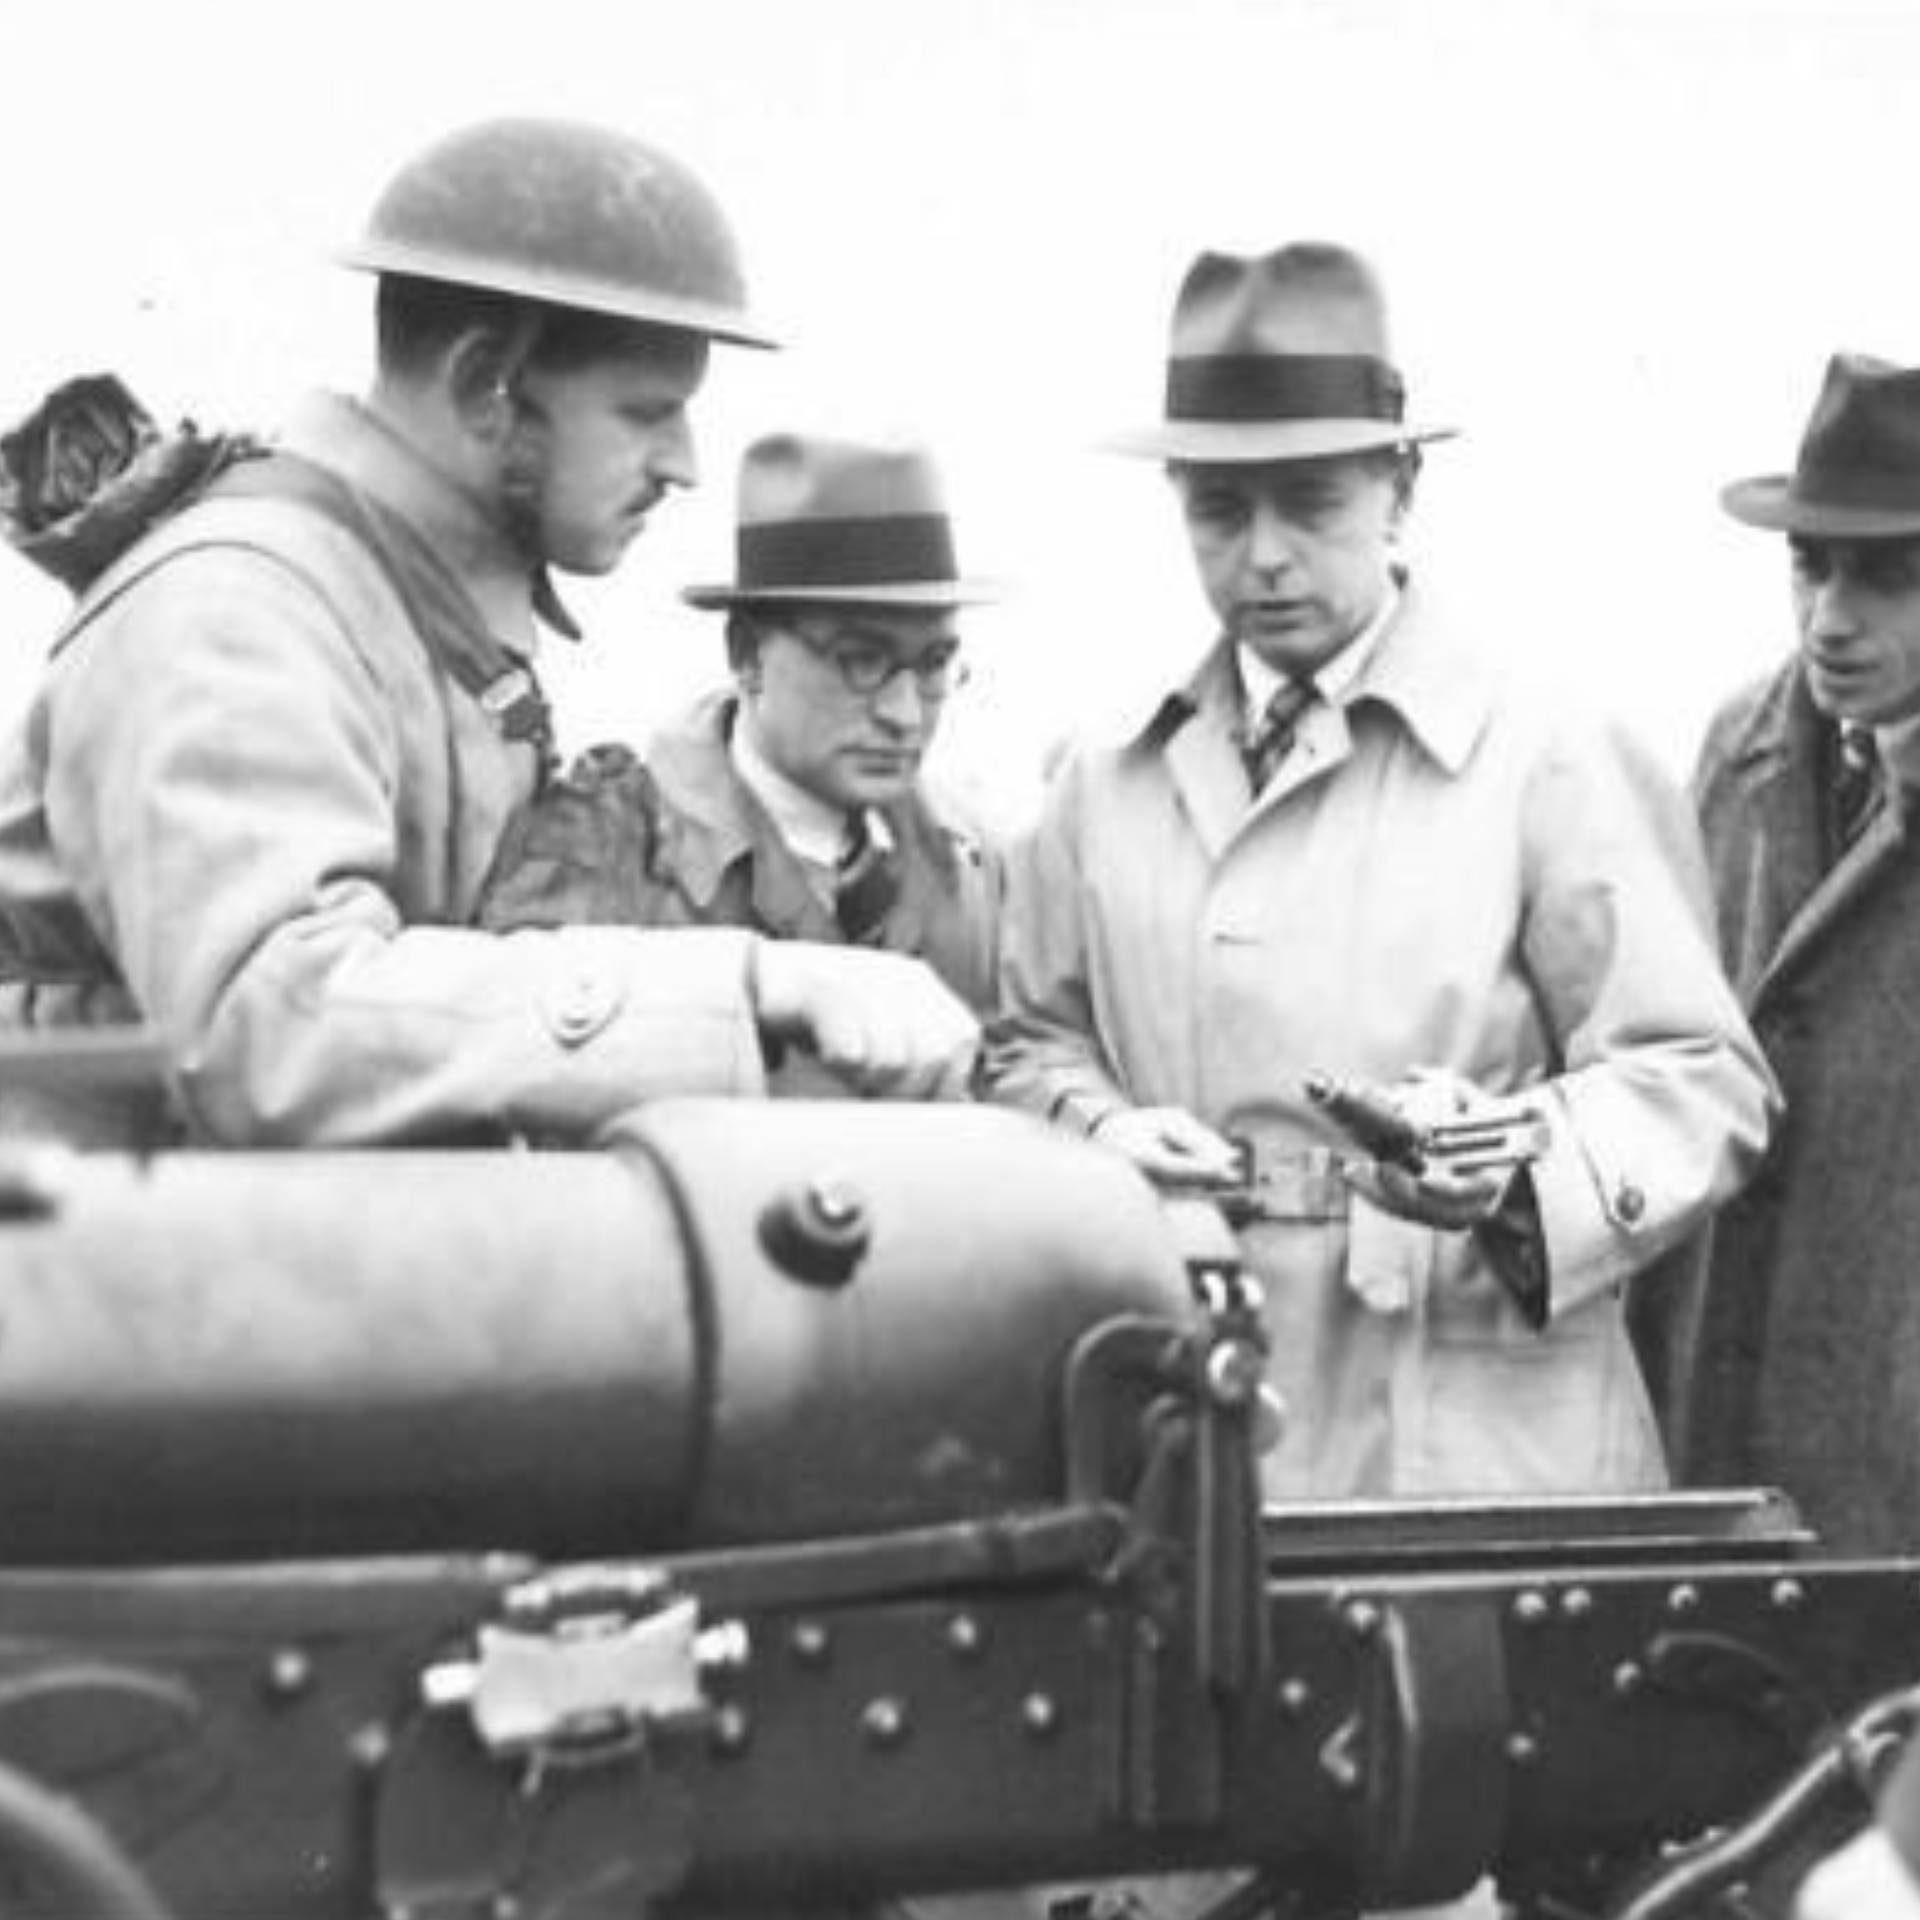 A 5th Divisional Artillery officer shows the detail of a gun to the manager of a munitions factory in Northern Ireland.